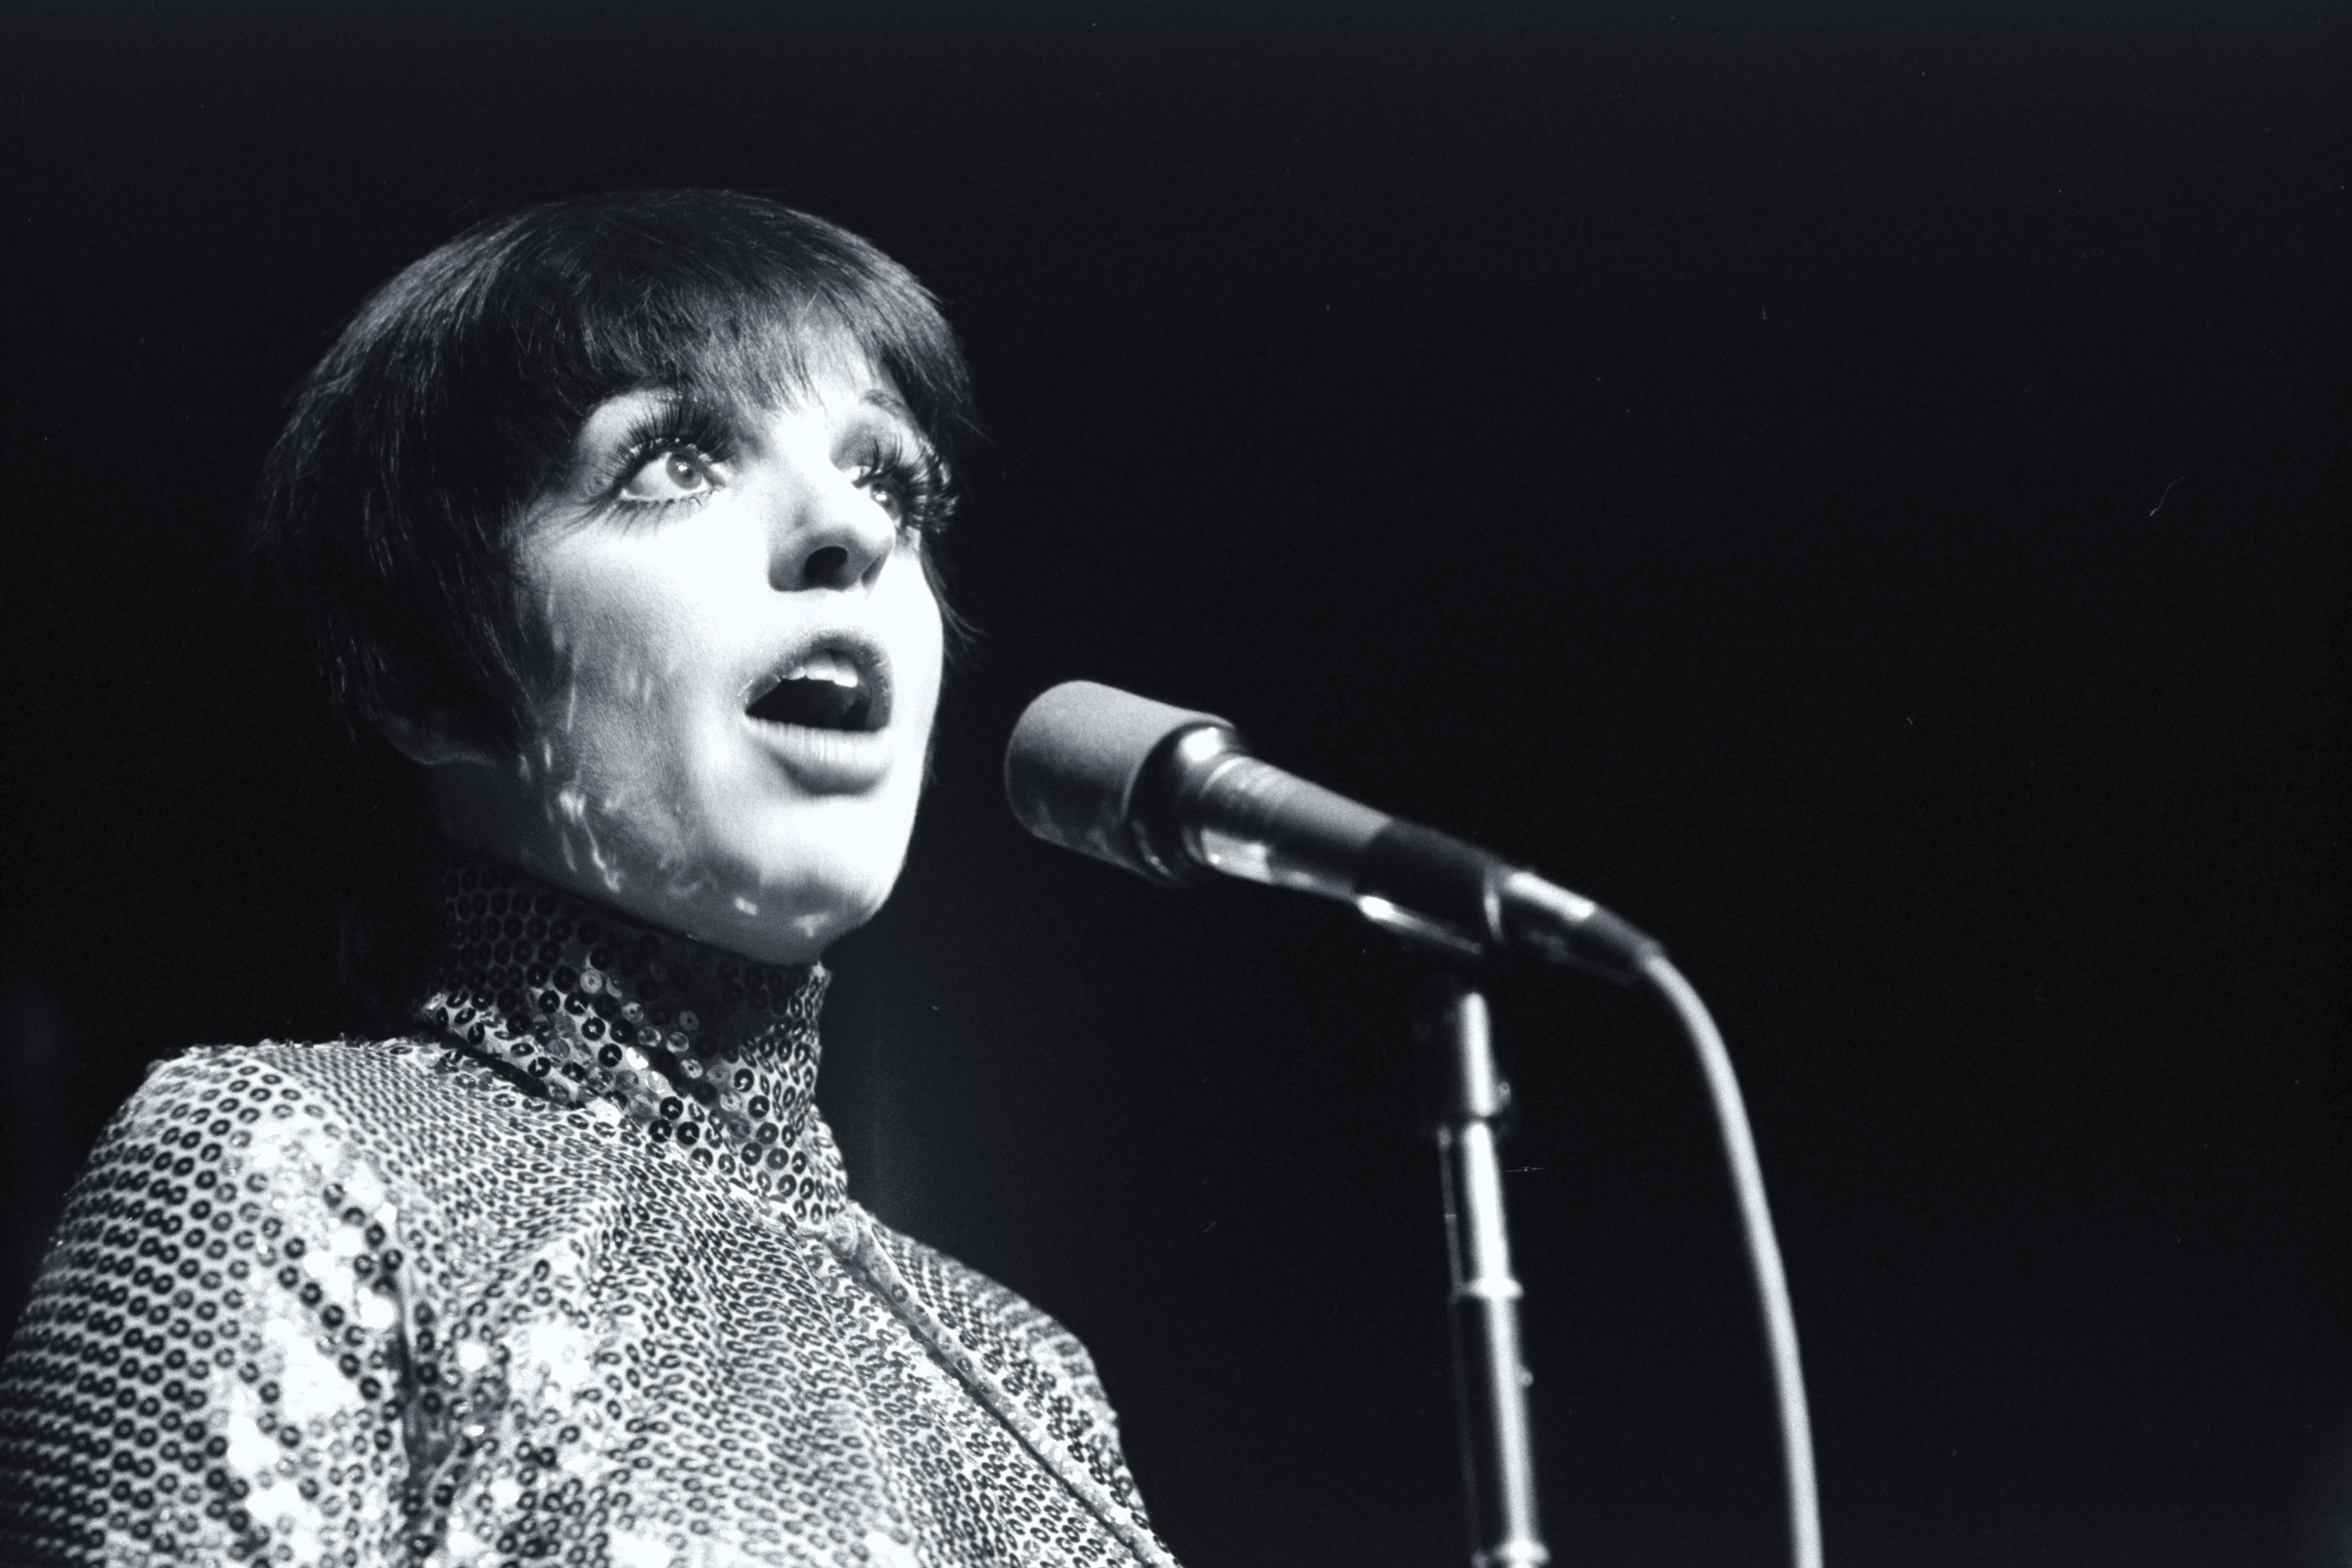 Liza Minnelli wears a sequined dress and sings into a microphone.